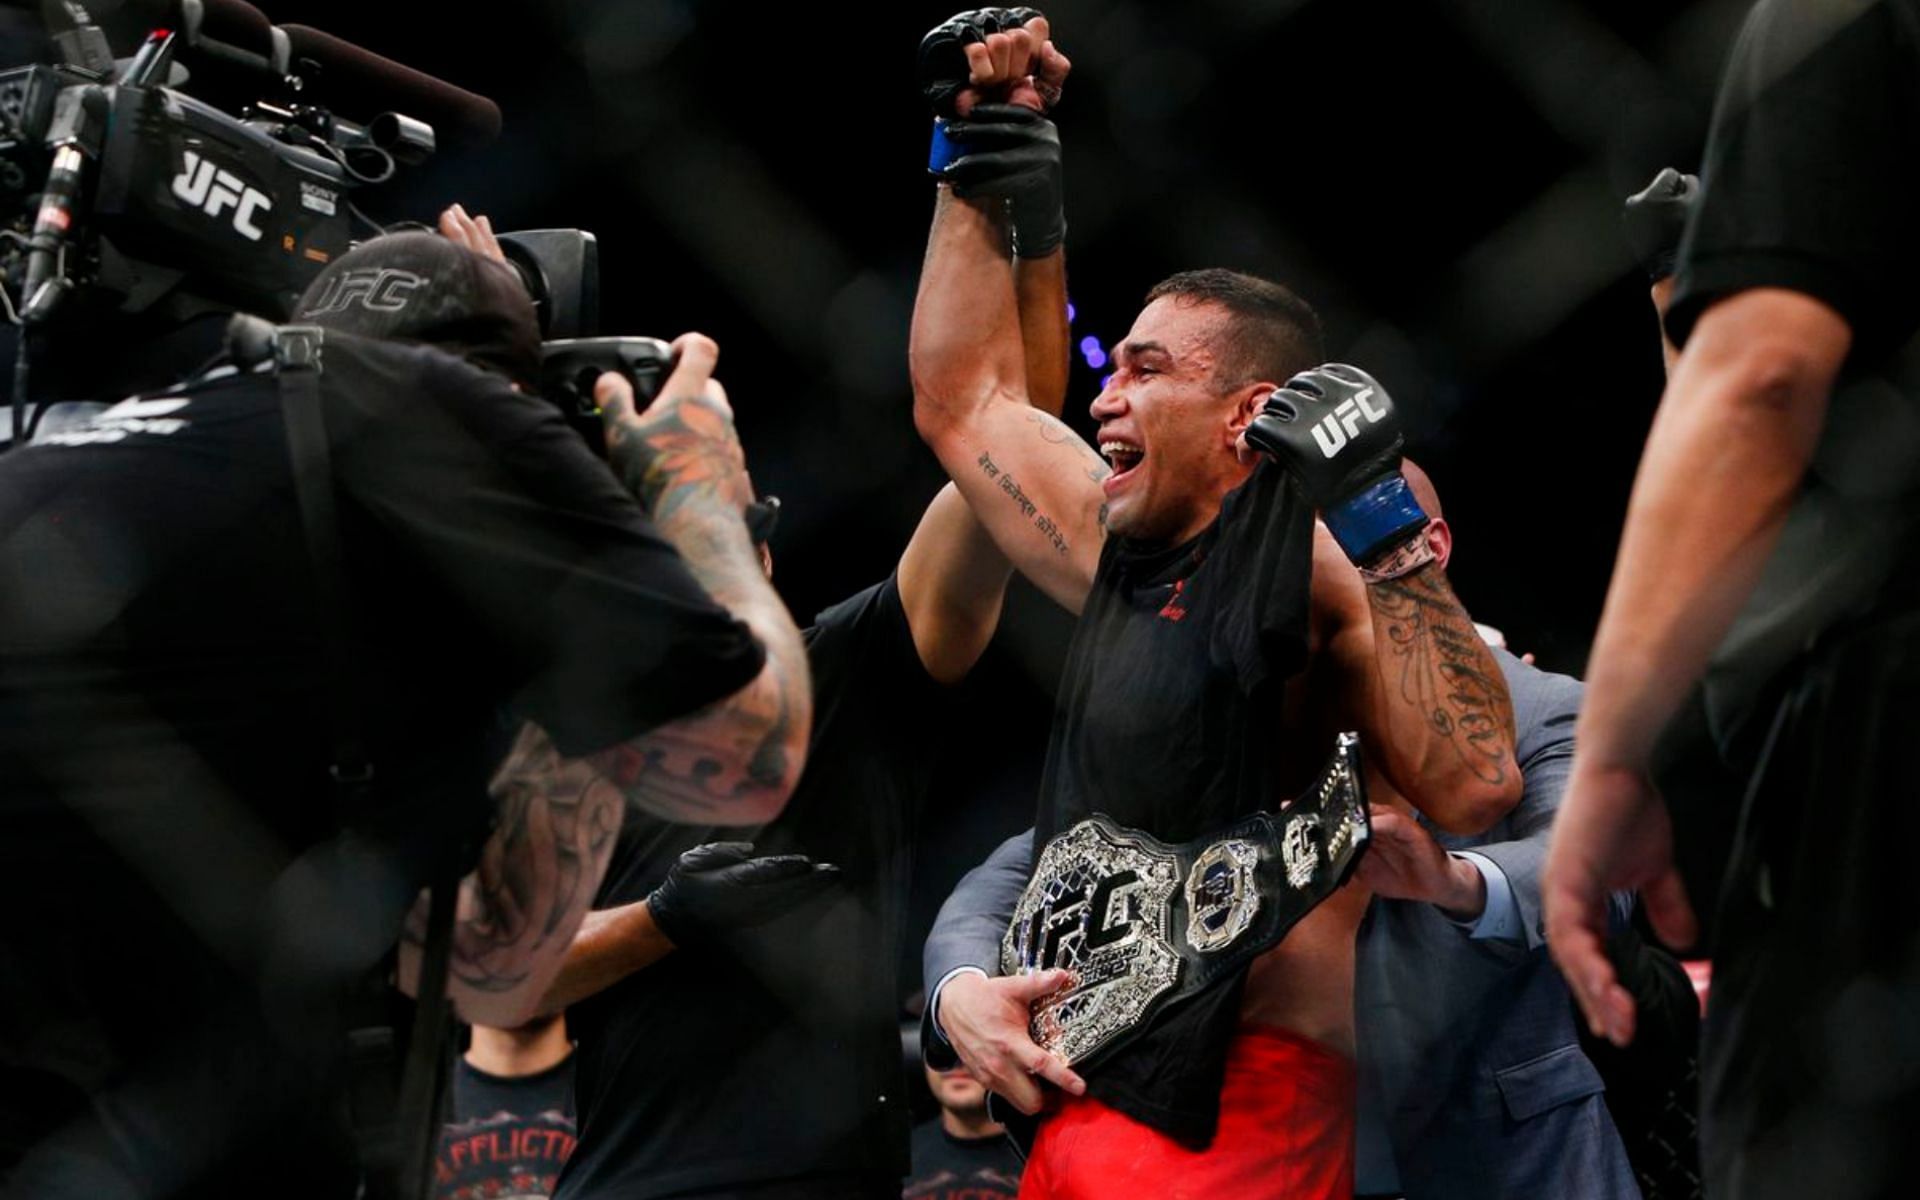 Fabricio Werdum became a first-time UFC champion while he was pushing 40